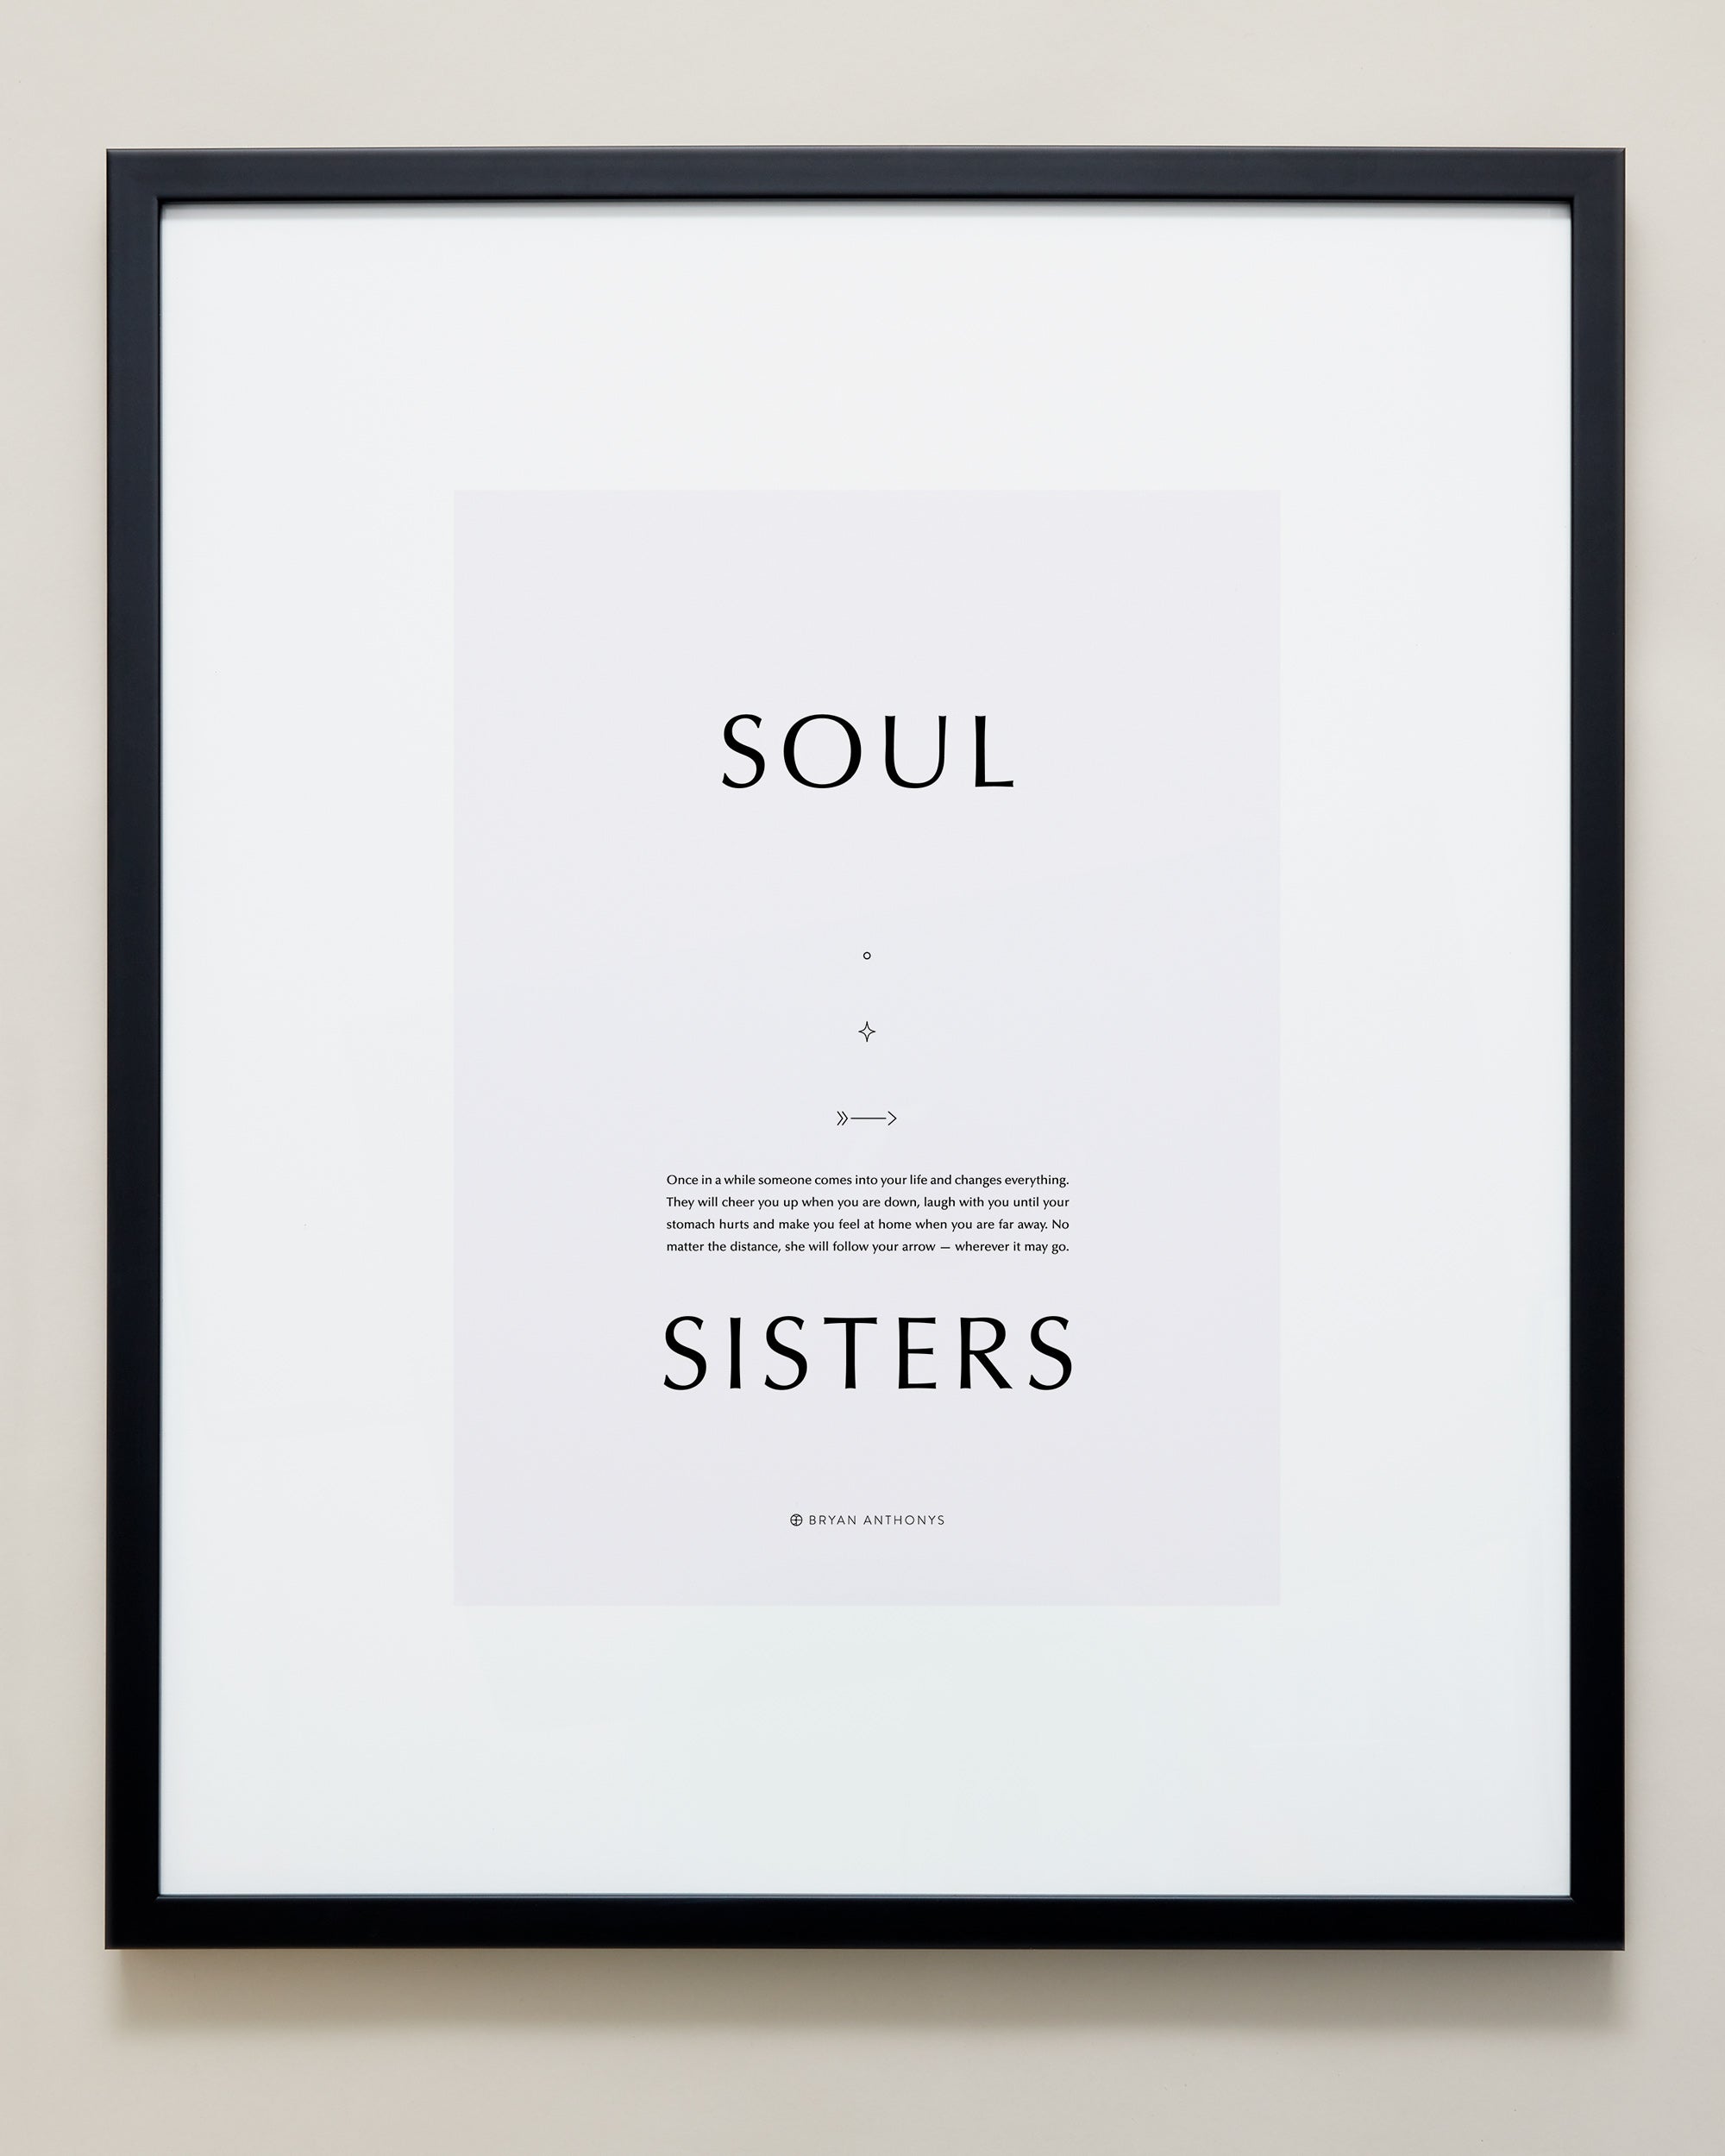 Bryan Anthonys Home Decor Purposeful Prints Soul Sisters Iconic Framed Print Gray Art with Black Frame 20x24